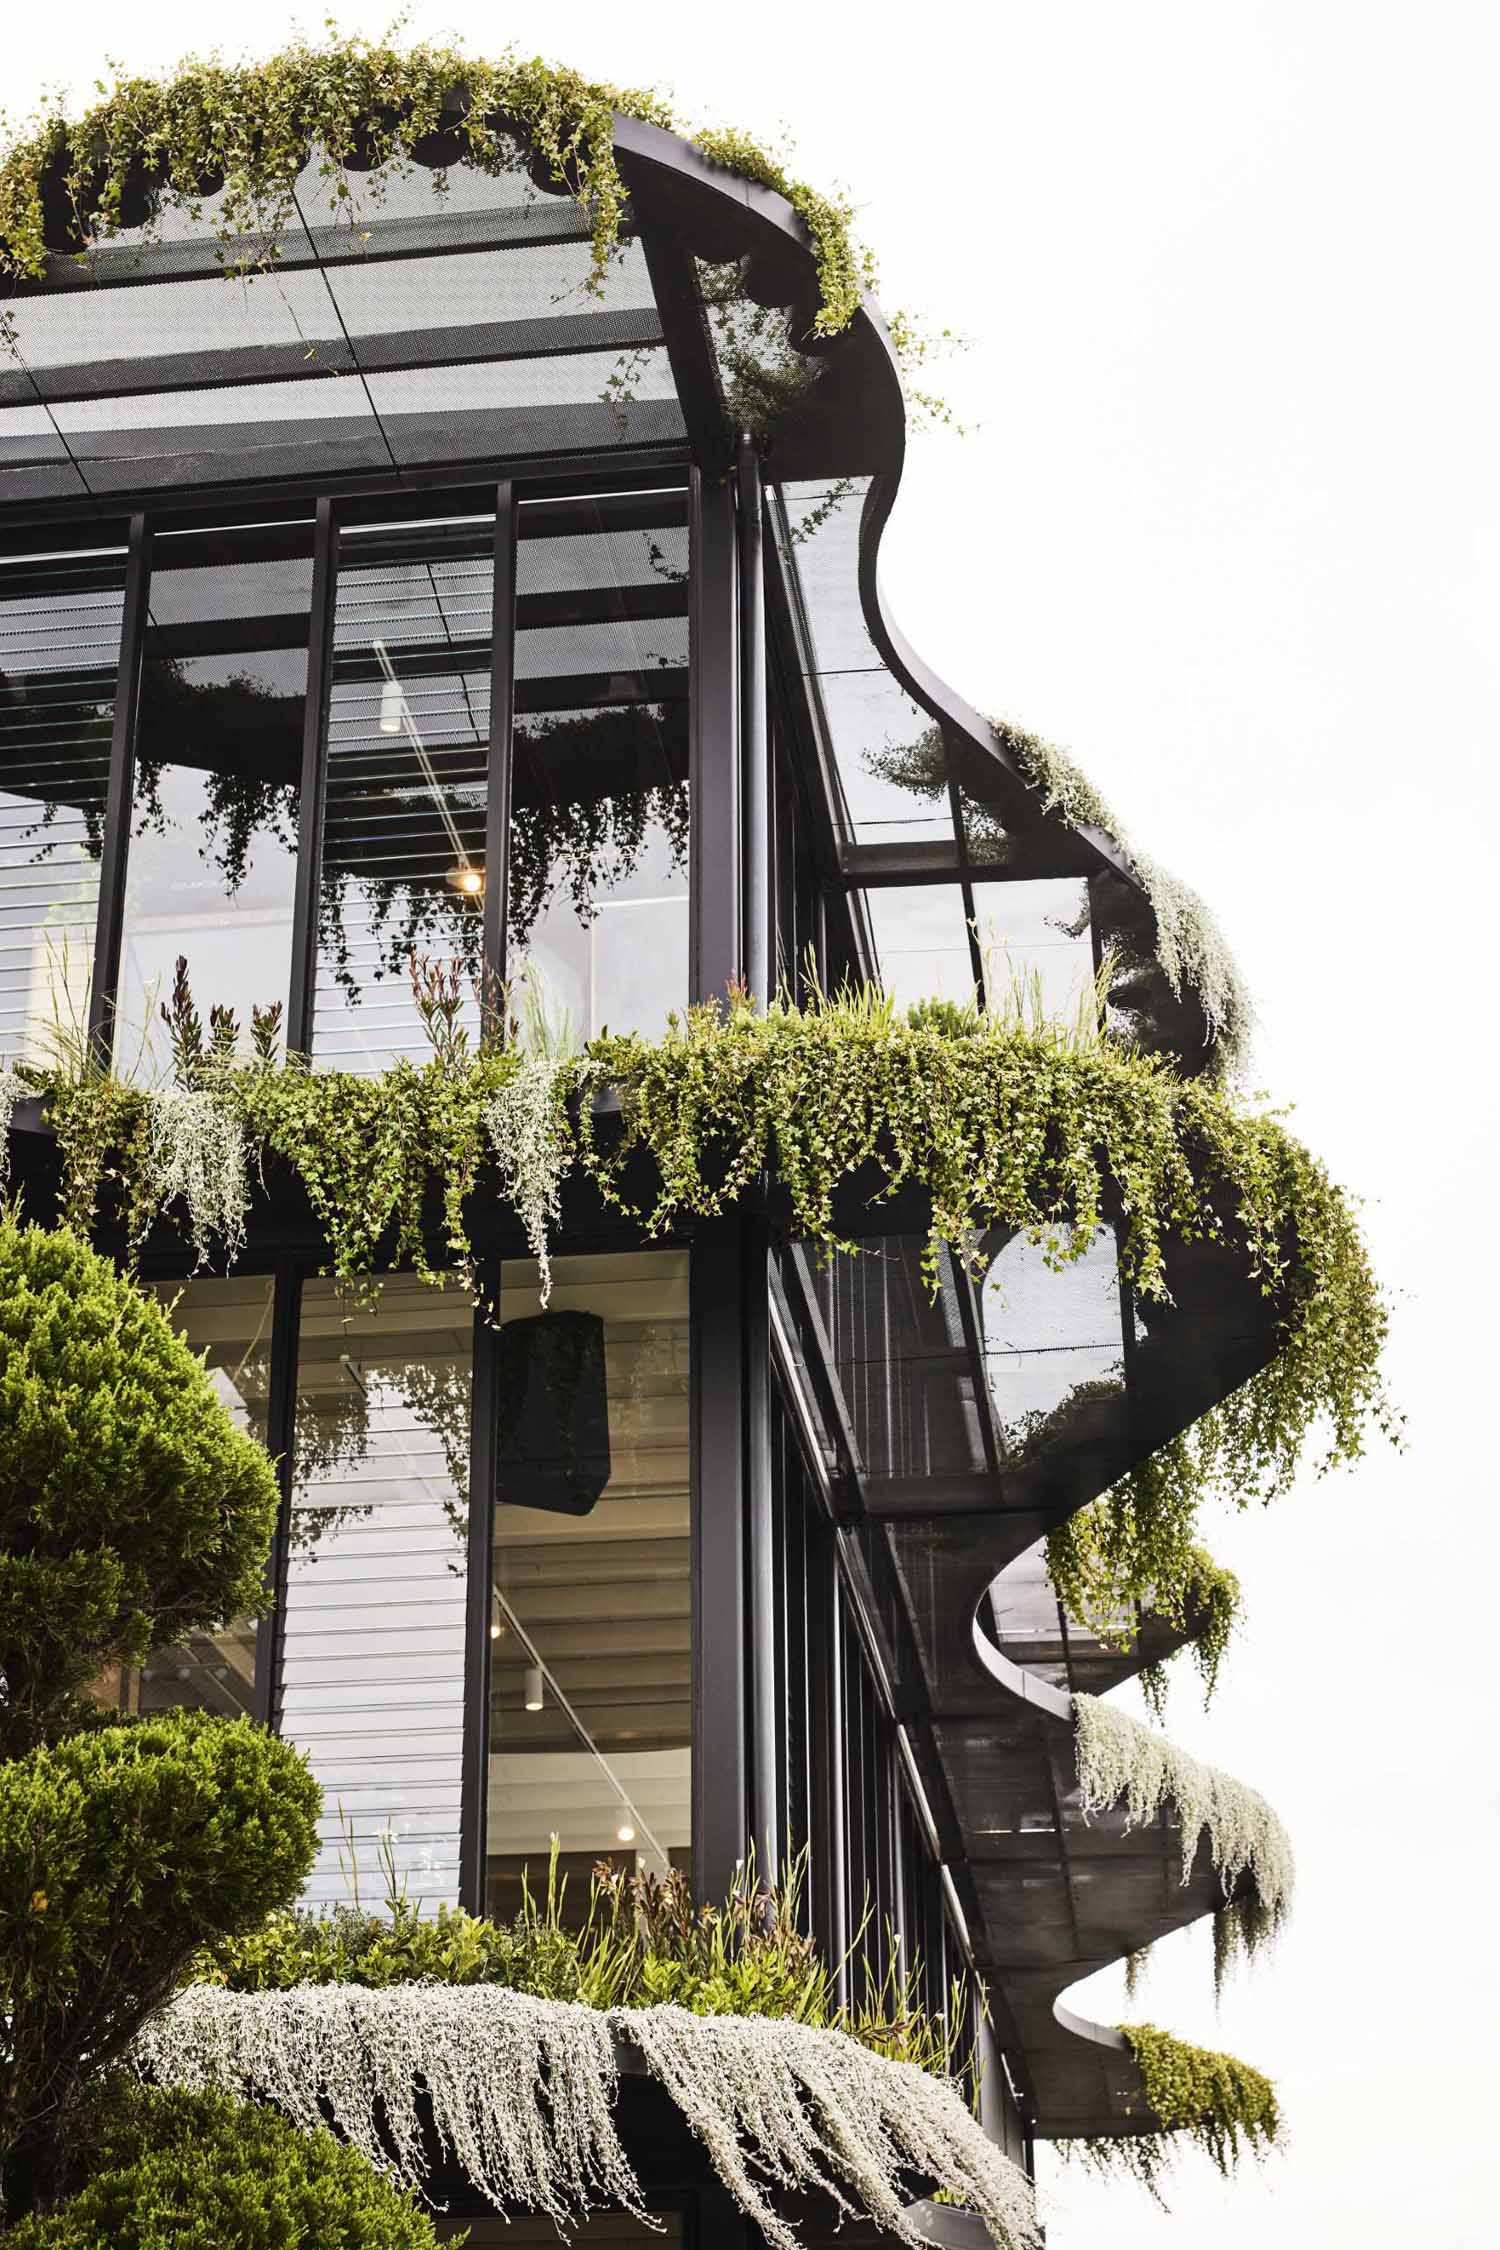 Drawing inspiration from the Australian landscape, Koichi Takada Architects designed a three-storey modular building that has over 1,000 native Australian plants and flowers on its facade.